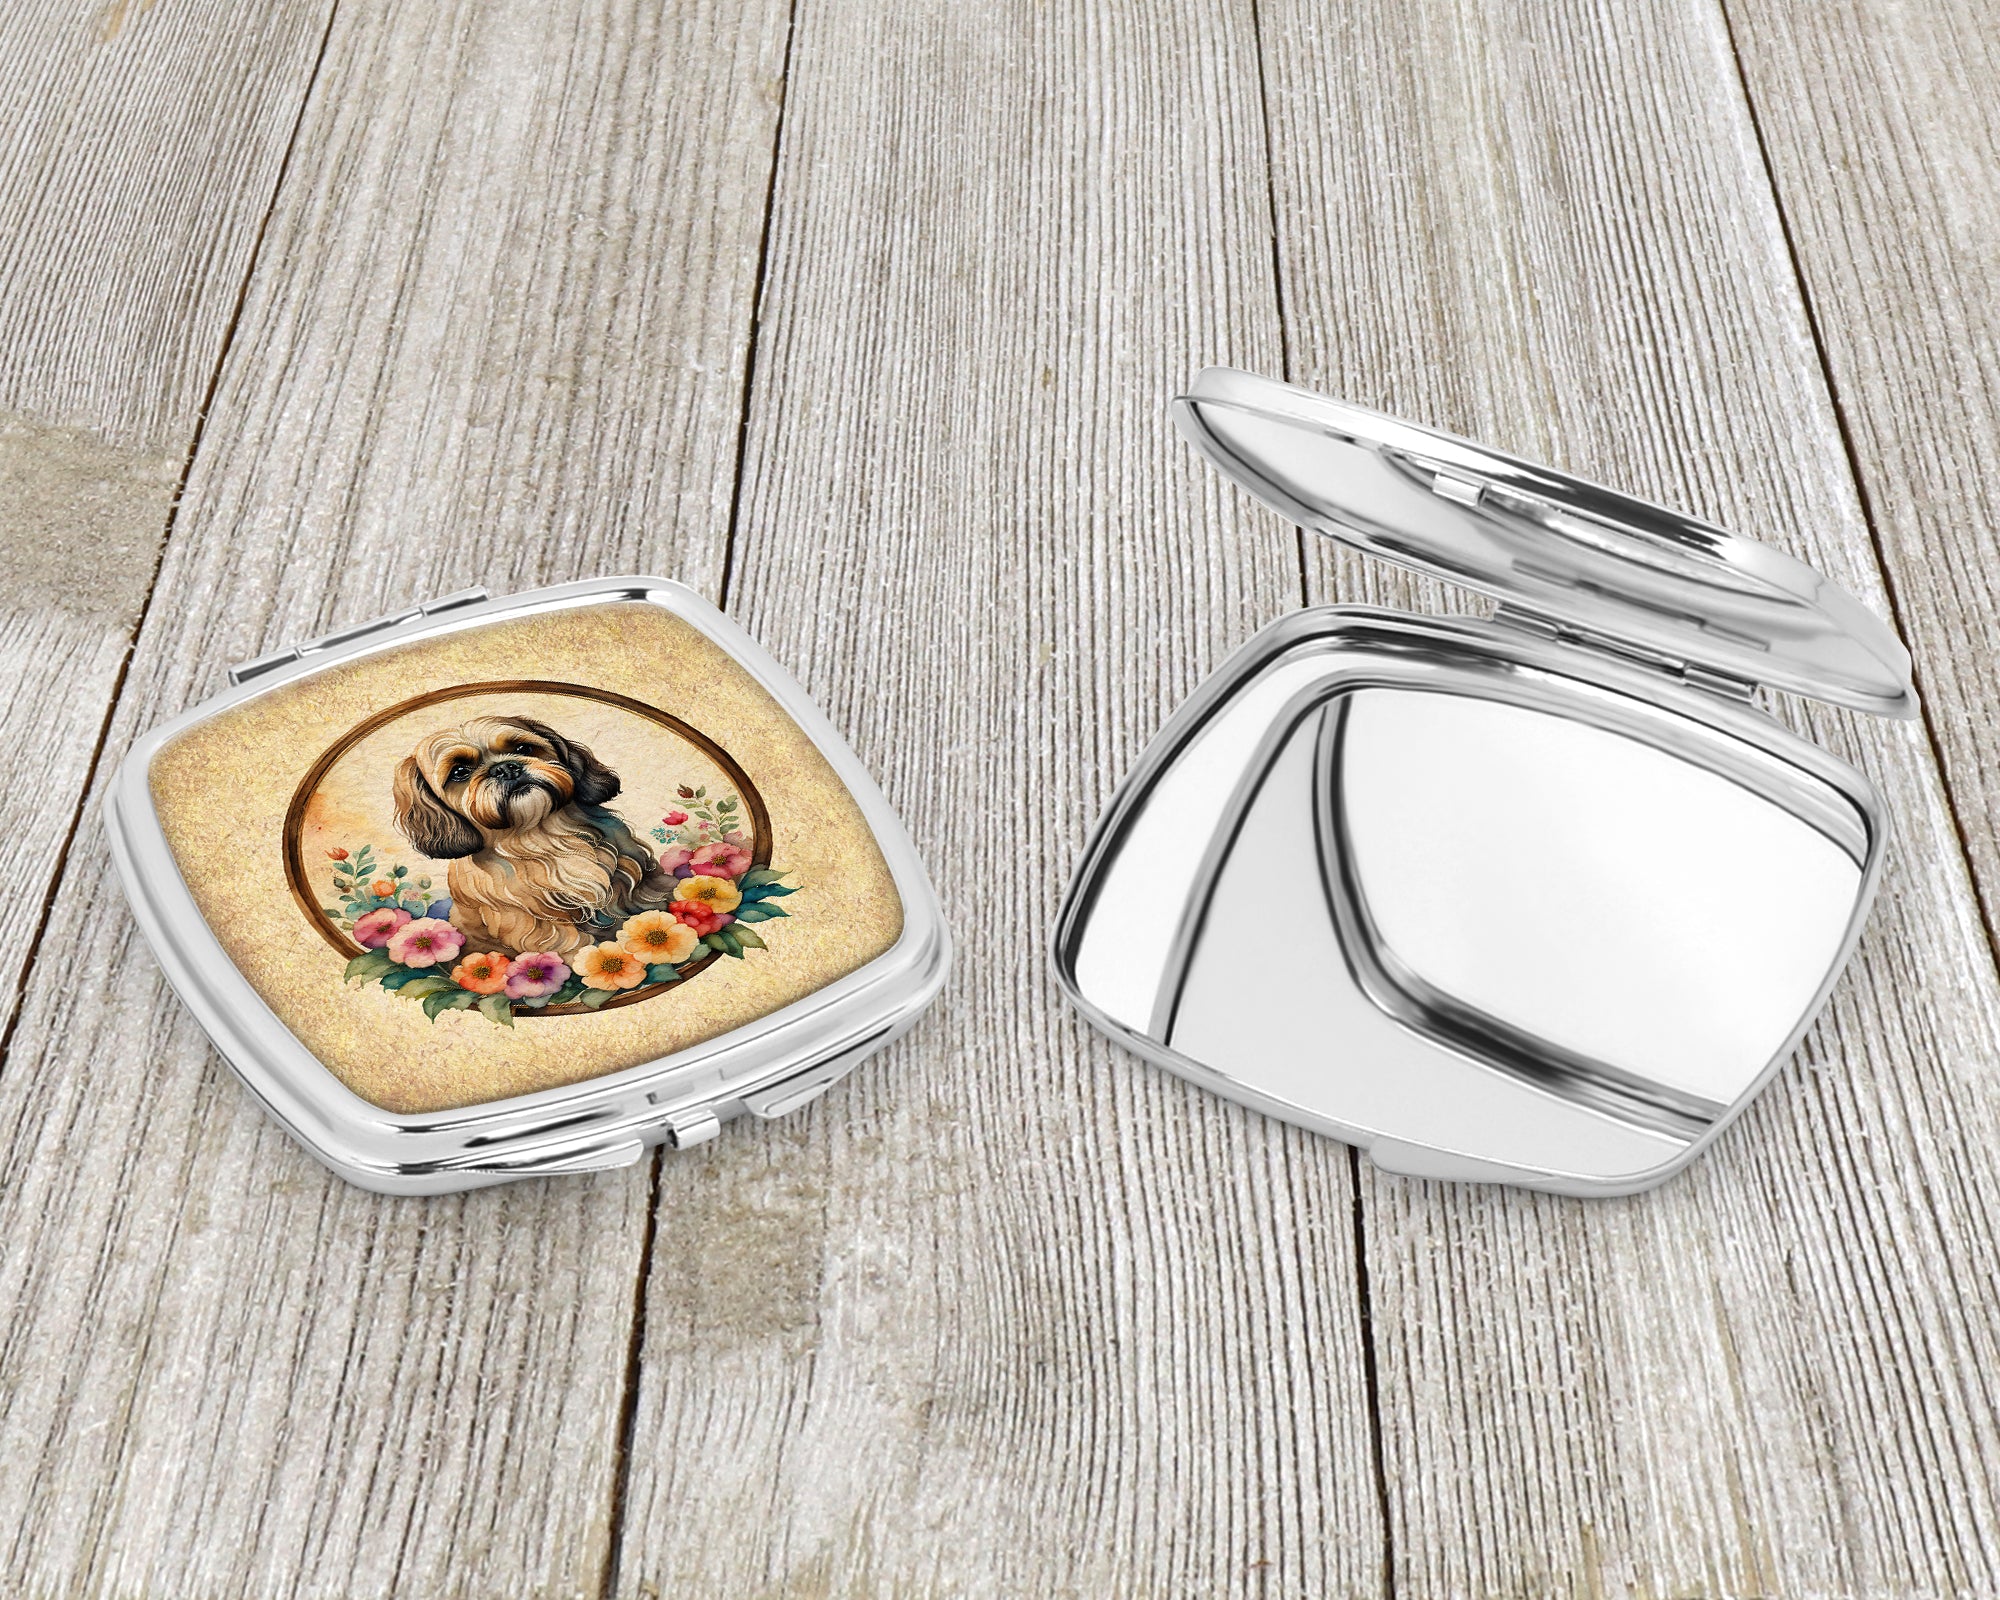 Lhasa Apso and Flowers Compact Mirror